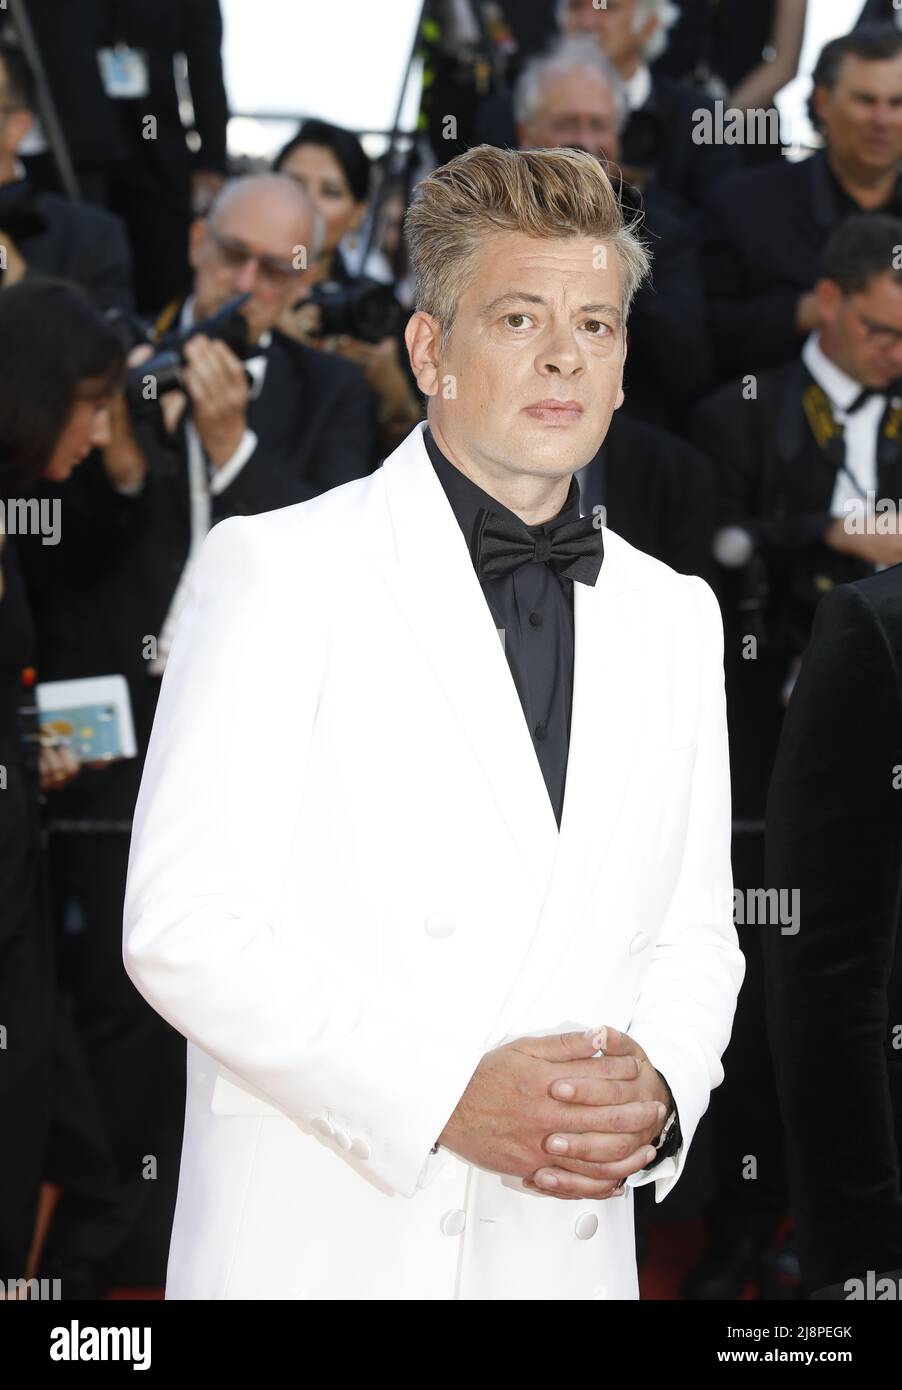 Cannes, France. 17th May, 2022. Benjamin Biolay attends the screening of 'Final Cut (Coupez!)' and opening ceremony red carpet for the 75th annual Cannes film festival at Palais des Festivals on May 17, 2022 in Cannes, France. Photo: DGP/imageSPACE/Sipa USA Credit: Sipa USA/Alamy Live News Stock Photo